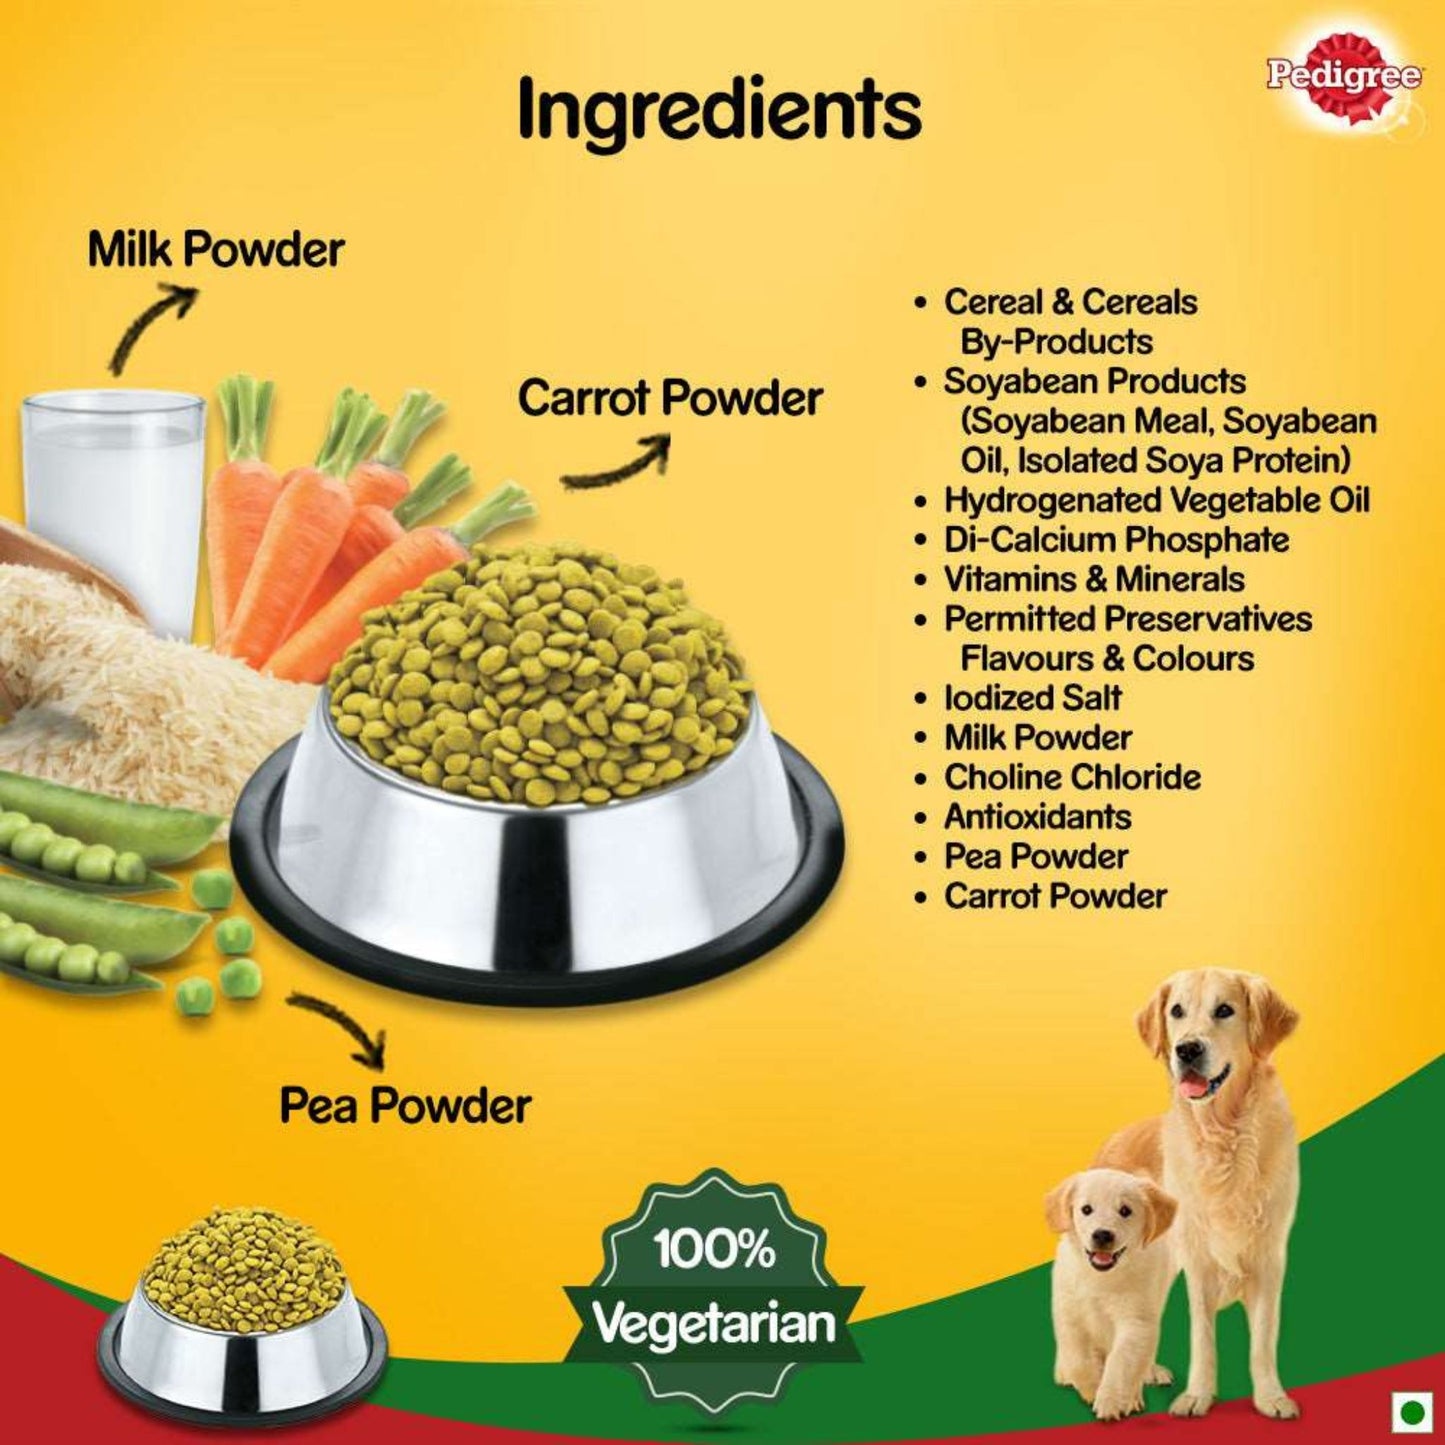 Pedigree Complete & Balanced Food for Puppy & Adult Dogs, 100% Vegetarian - 2.8Kg